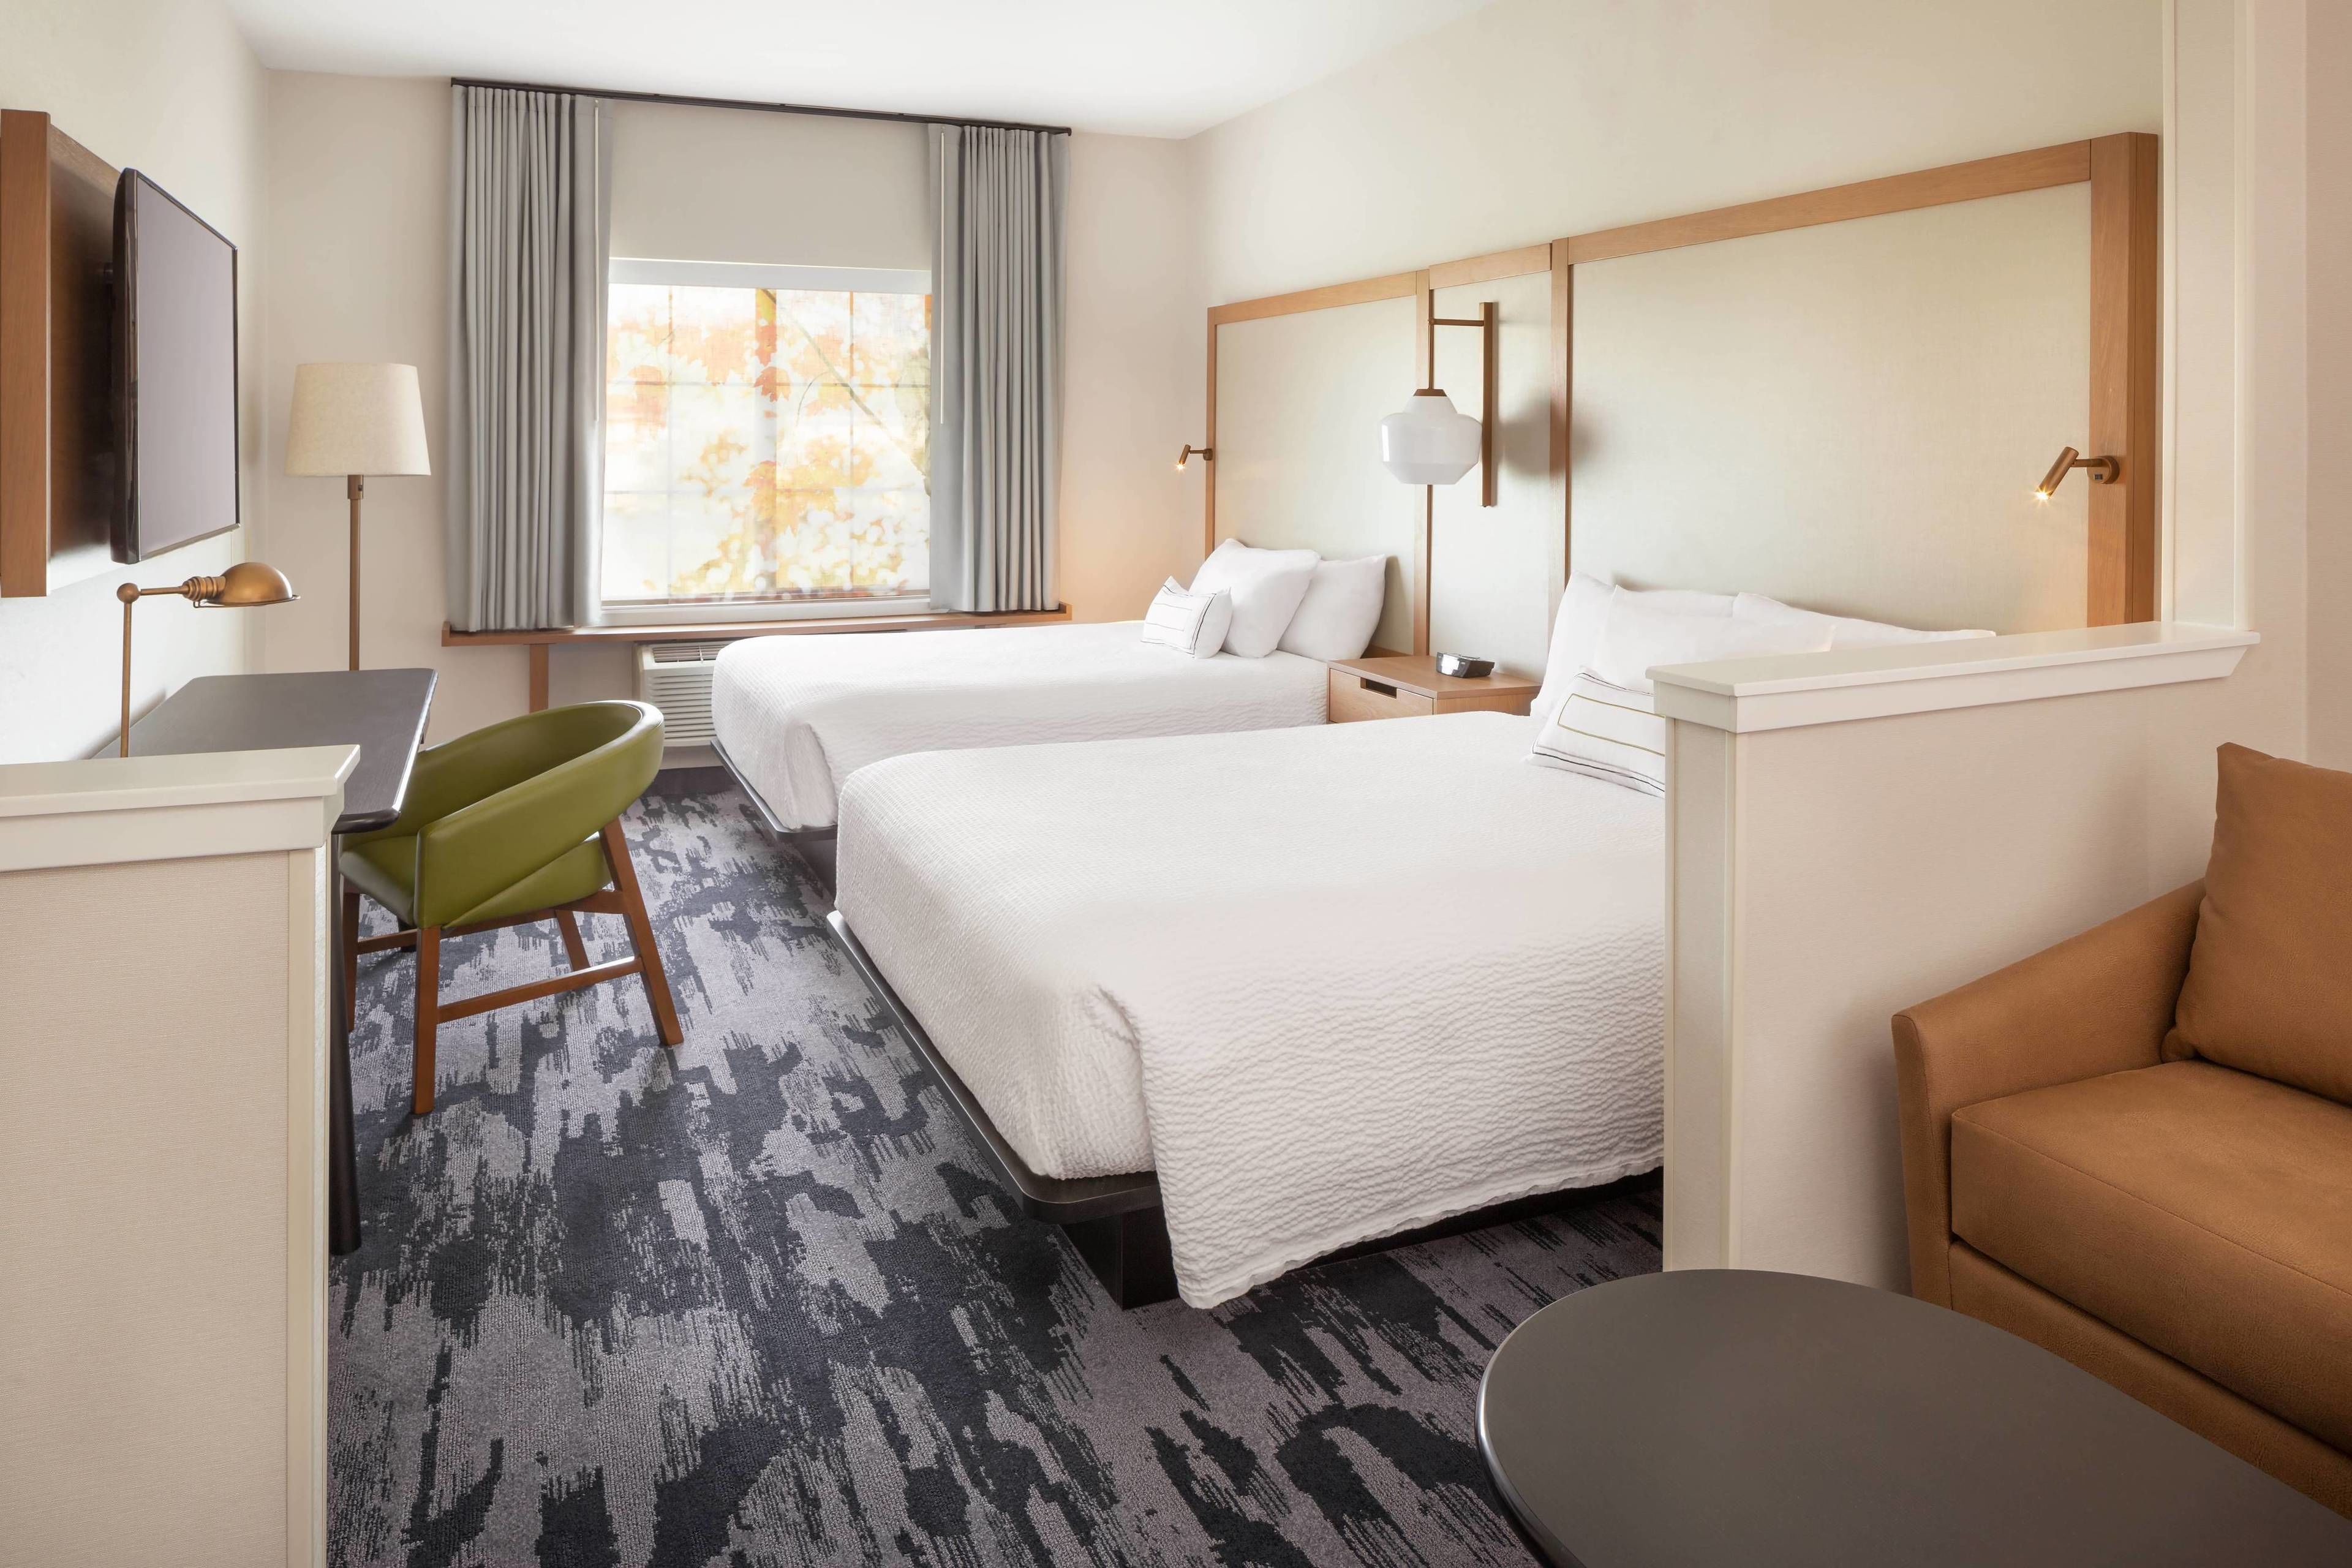 Fairfield Inn and Suites Napa Valley - American Canyon